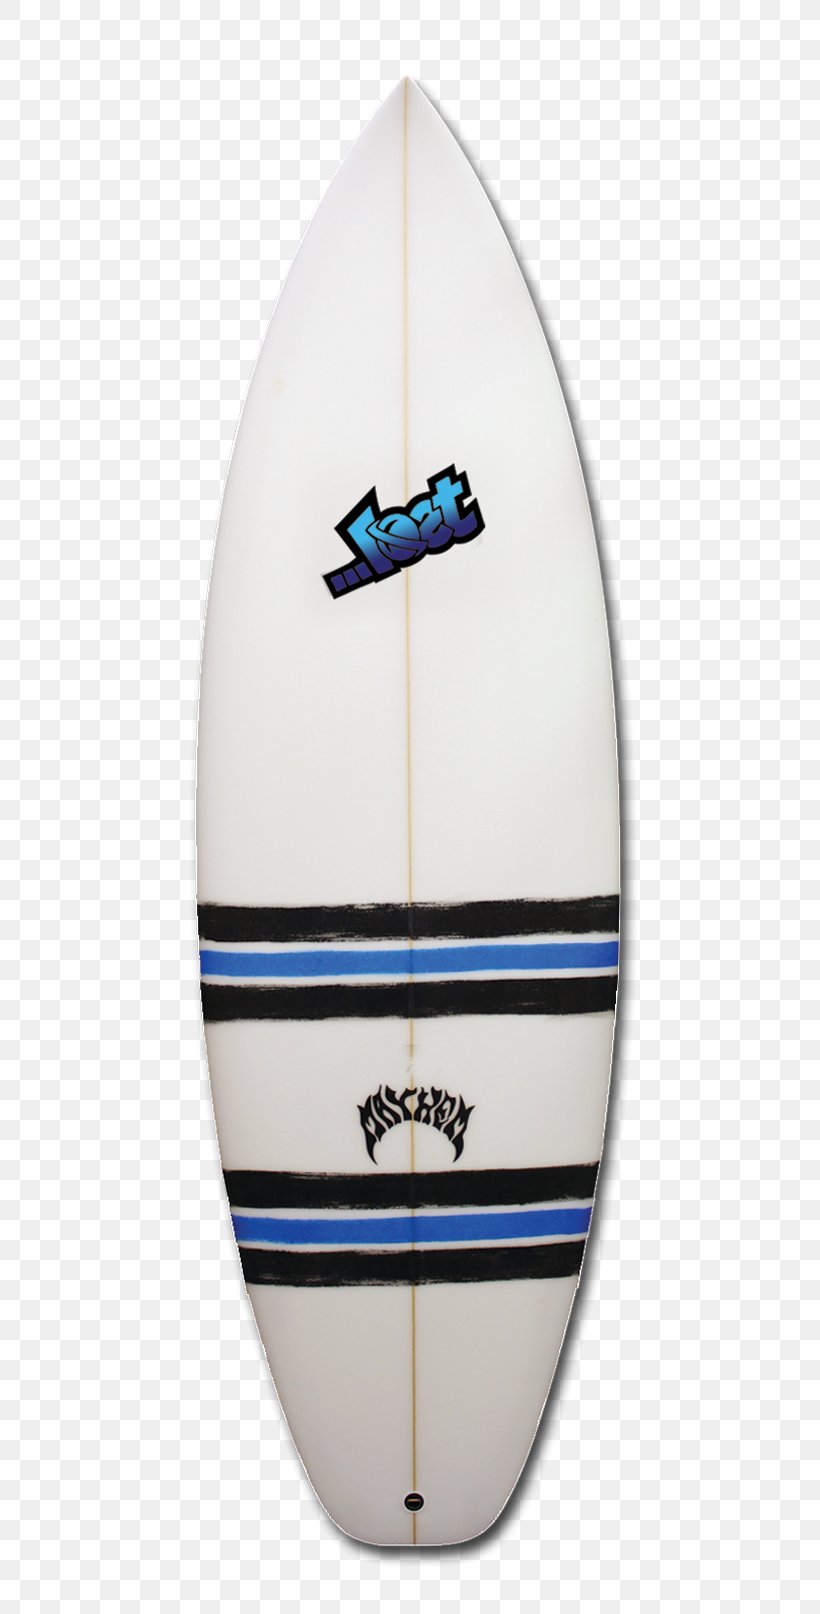 Lost Surfboards, PNG, 600x1614px, Surfboard, Fish, Lost Surfboards, Surfing Equipment And Supplies Download Free